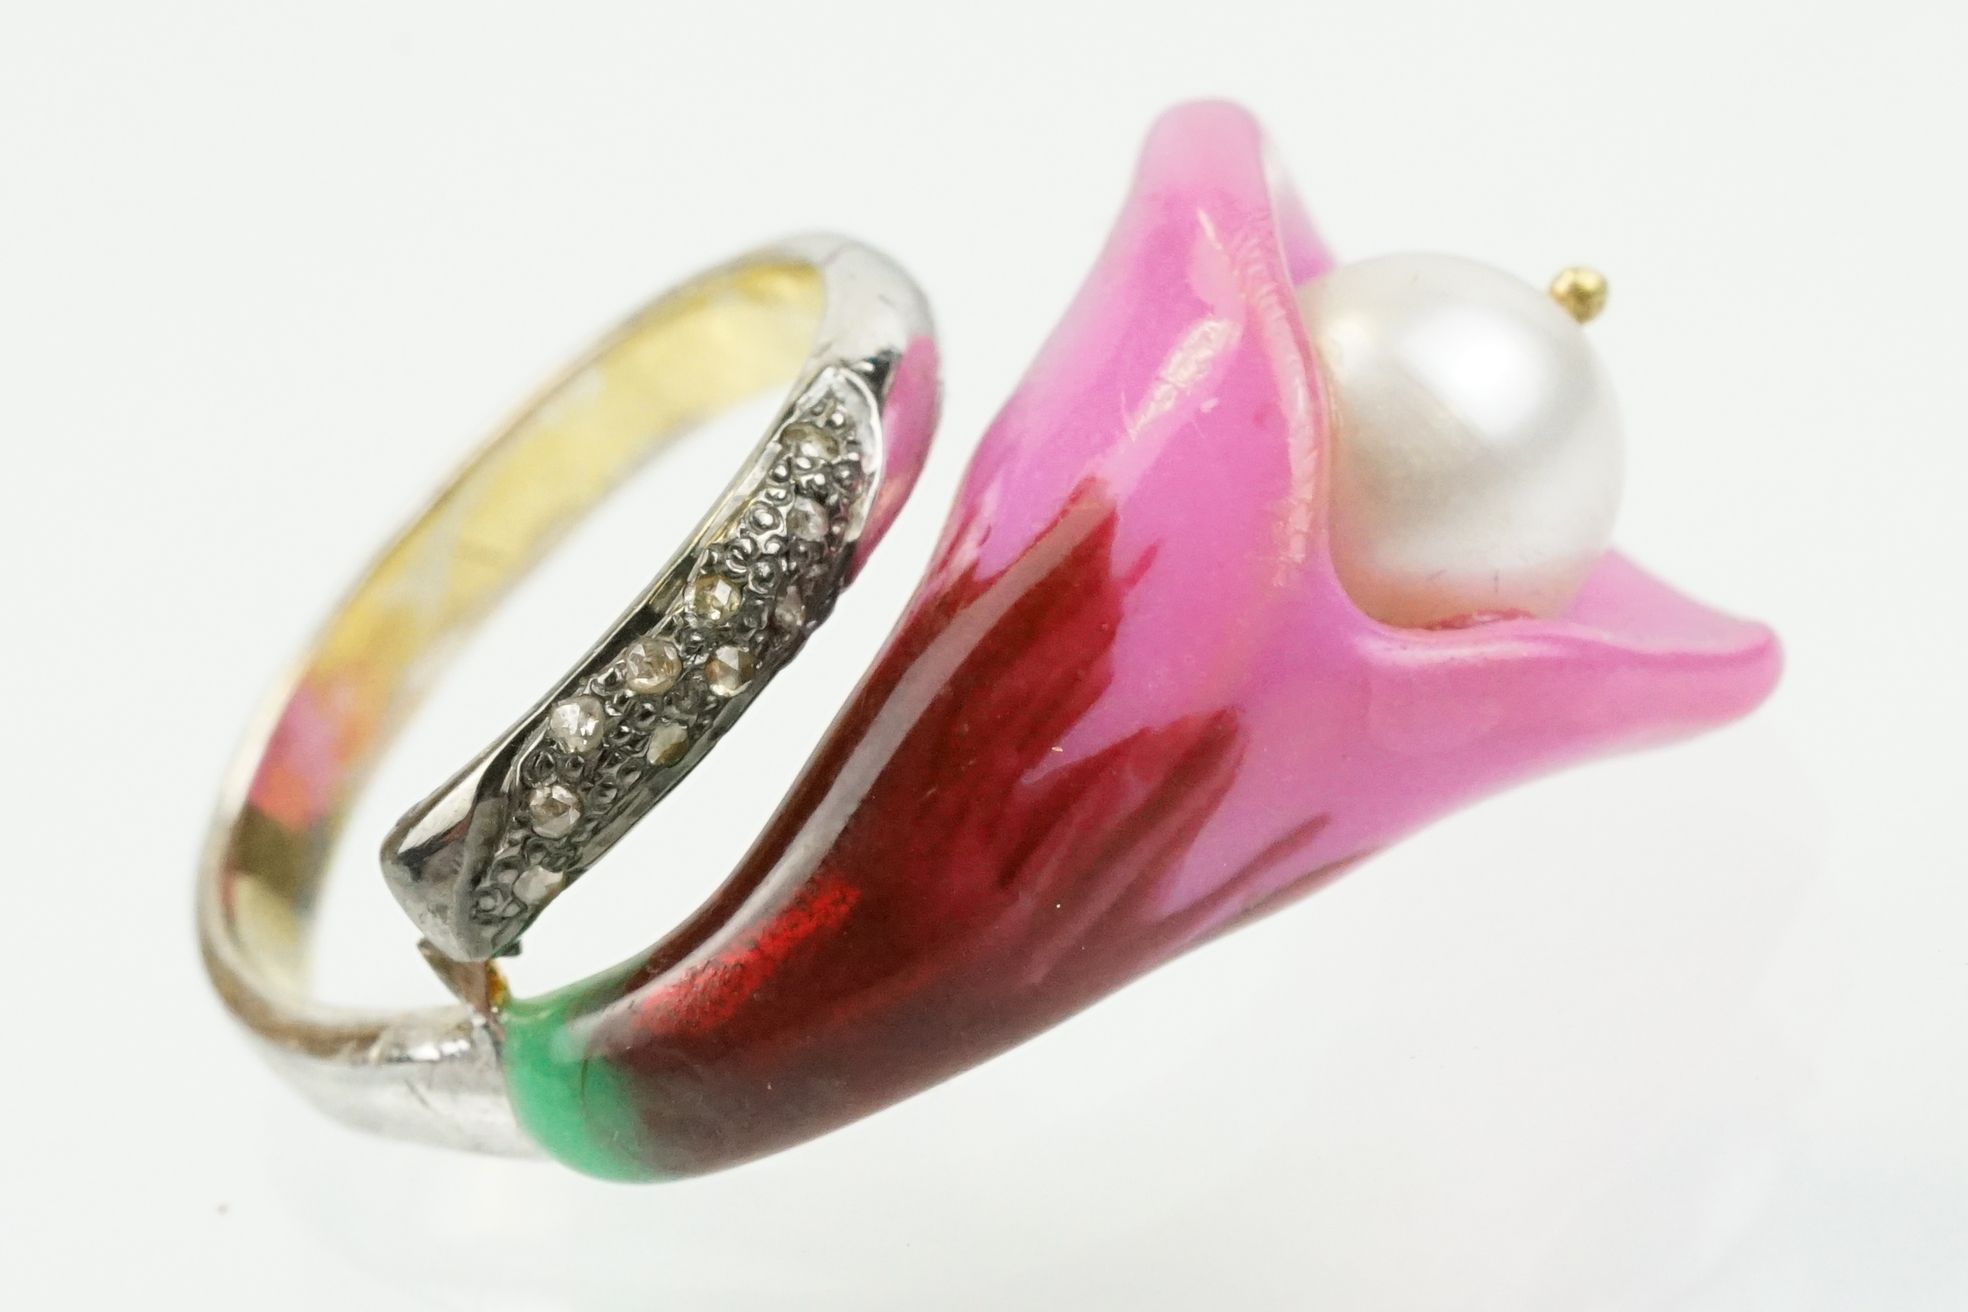 Enamelled flower formed ring being set with a cultured pearl to the head with diamond accent - Image 4 of 7